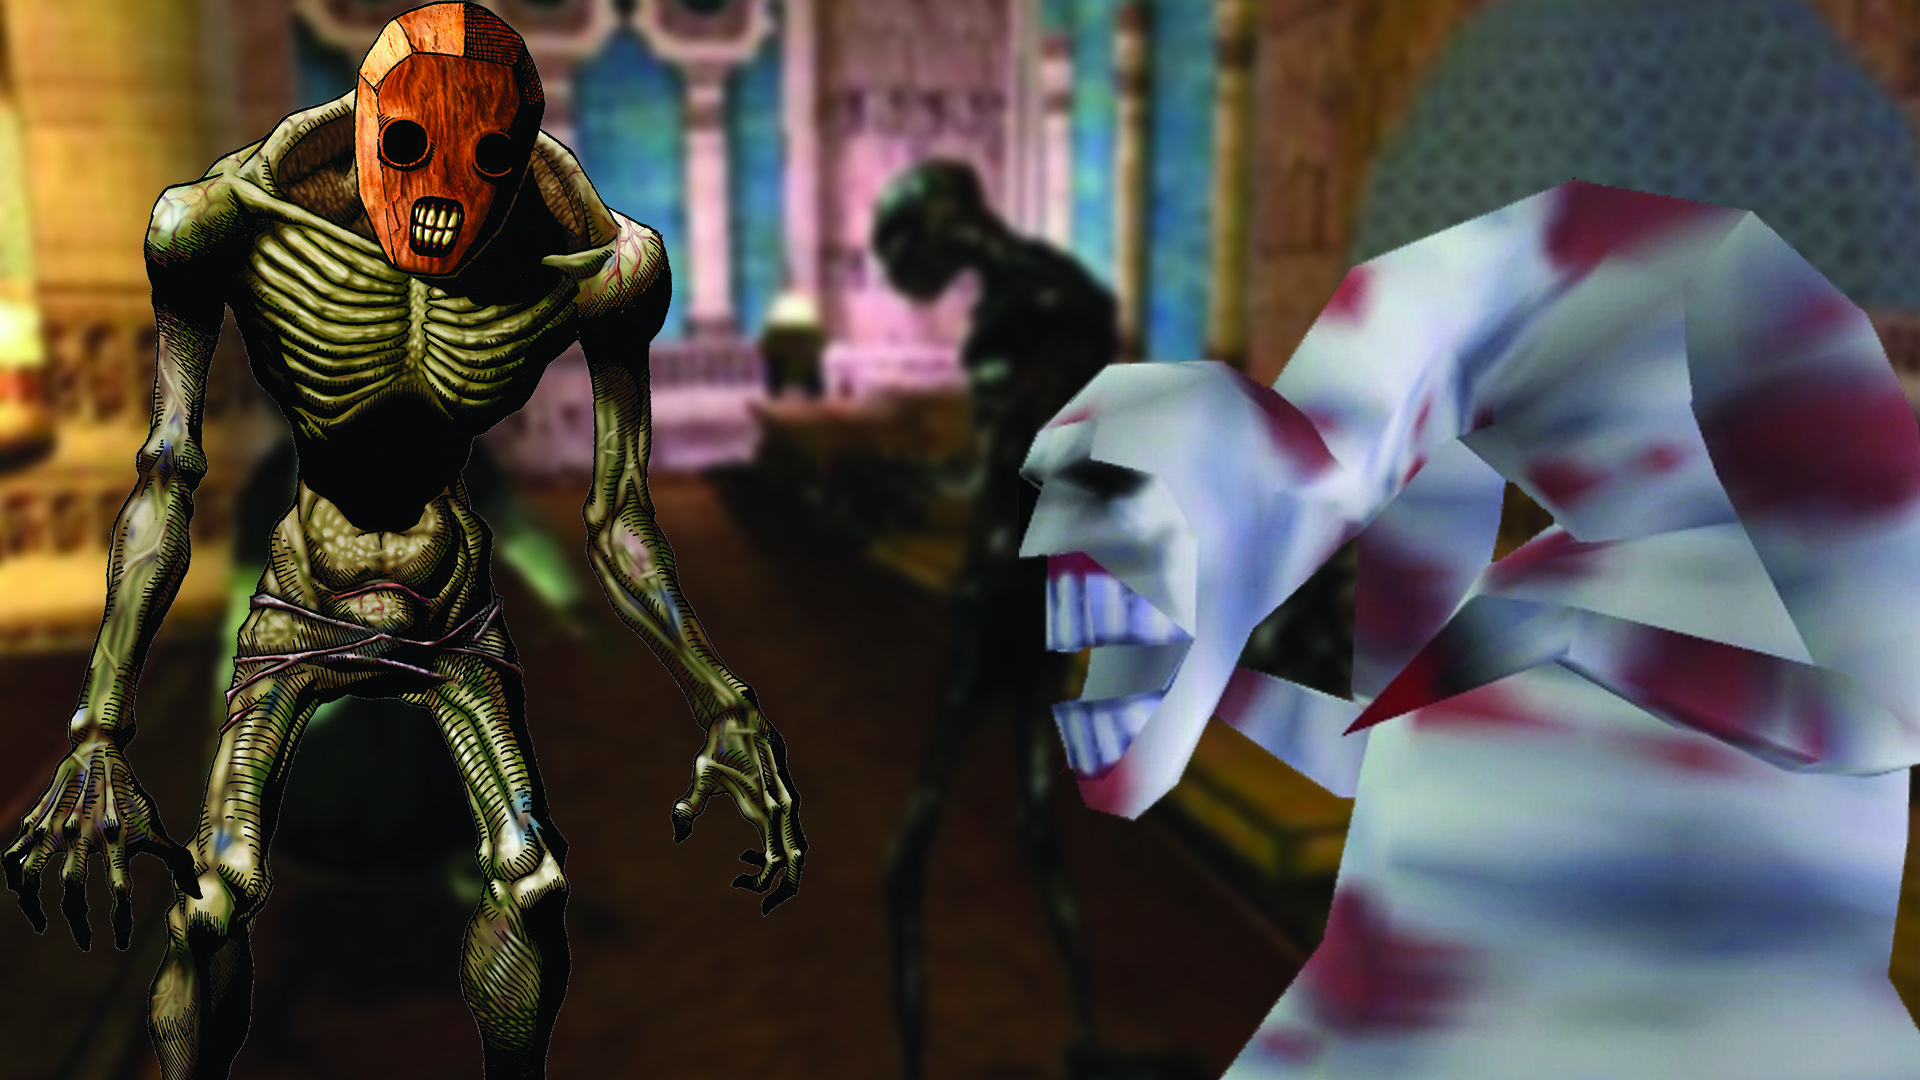 Scariest Moments In Nintendo Games